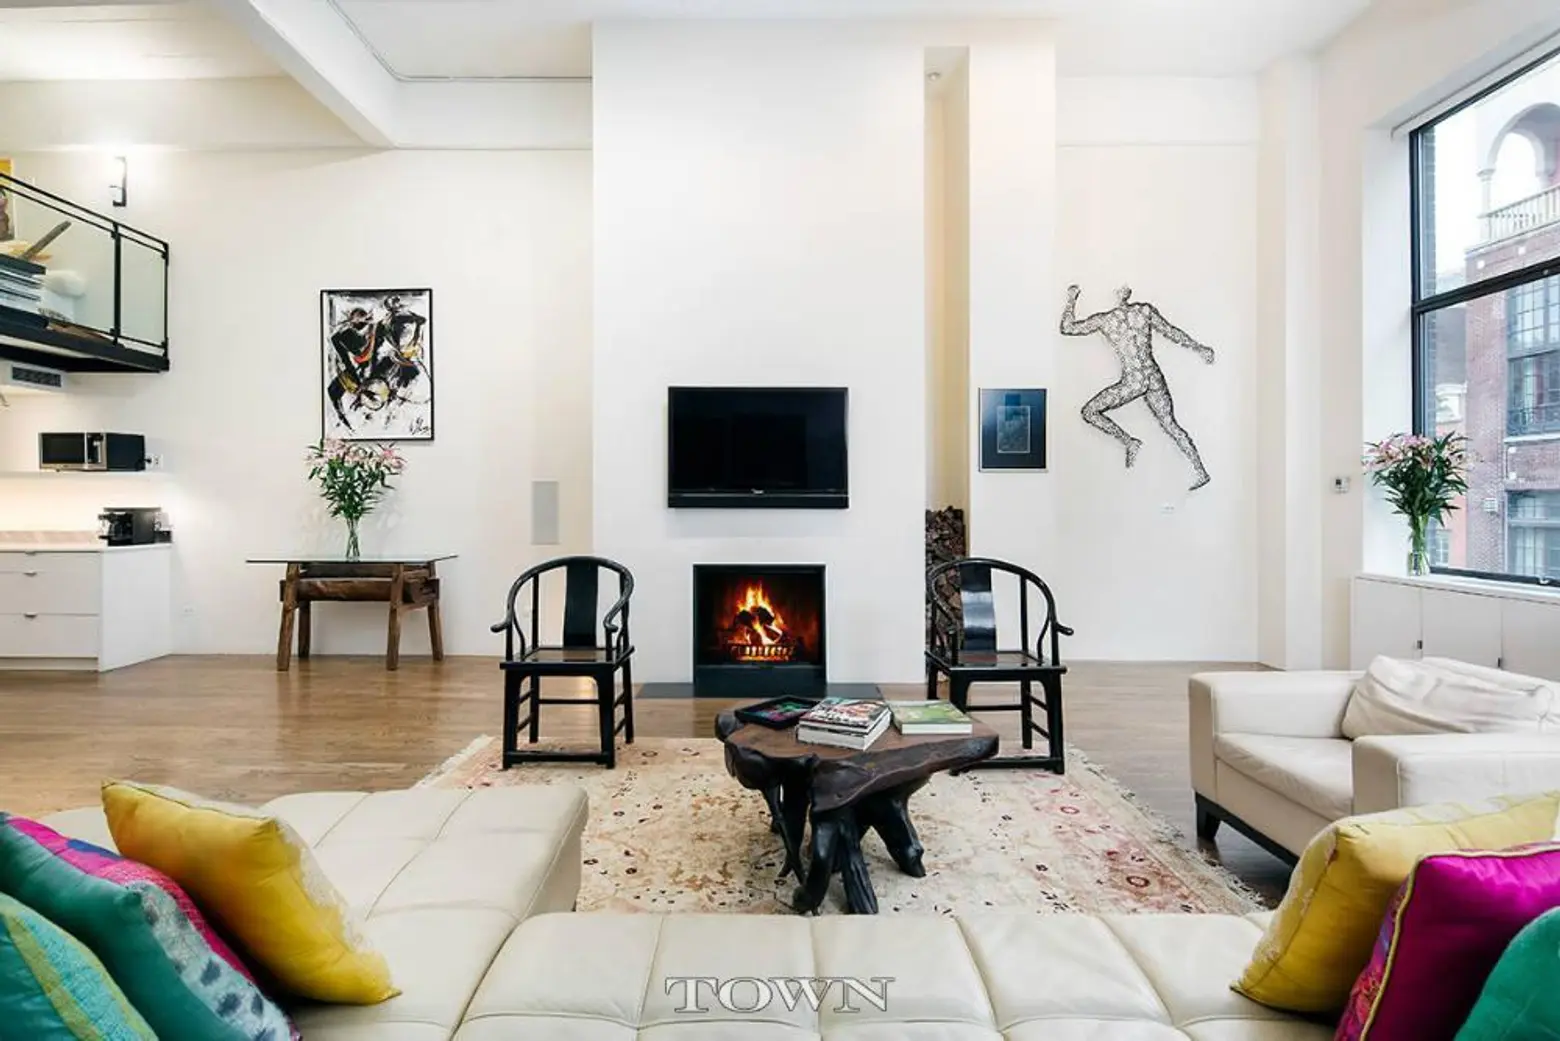 377 West 11th Street , West Village, Manhattan Co-op for Sale, NYC Apartment, Cool Listing, Glass Catwalk, Fireplace, Interiors